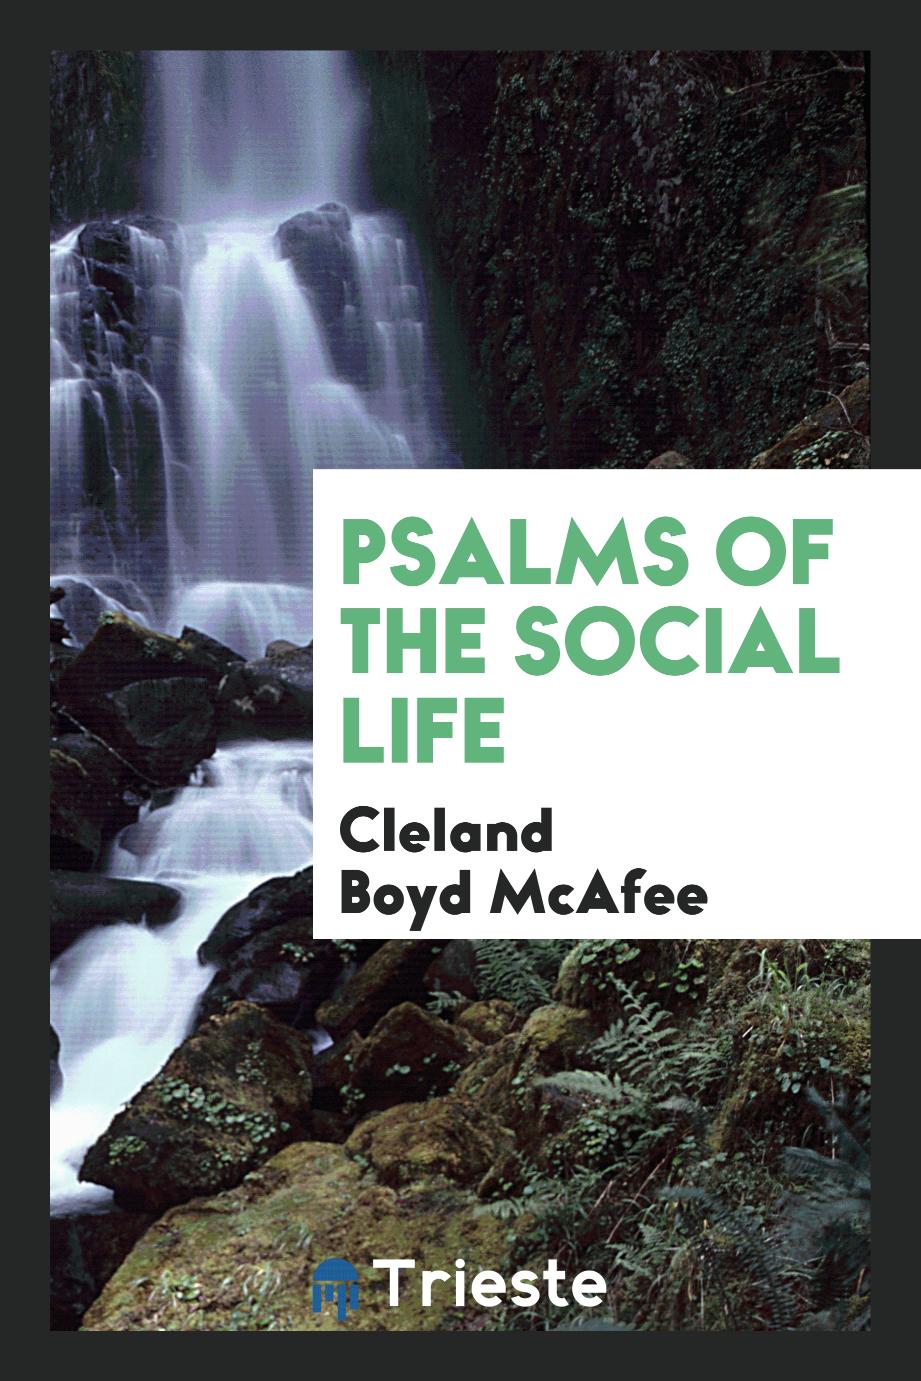 Psalms of the social life